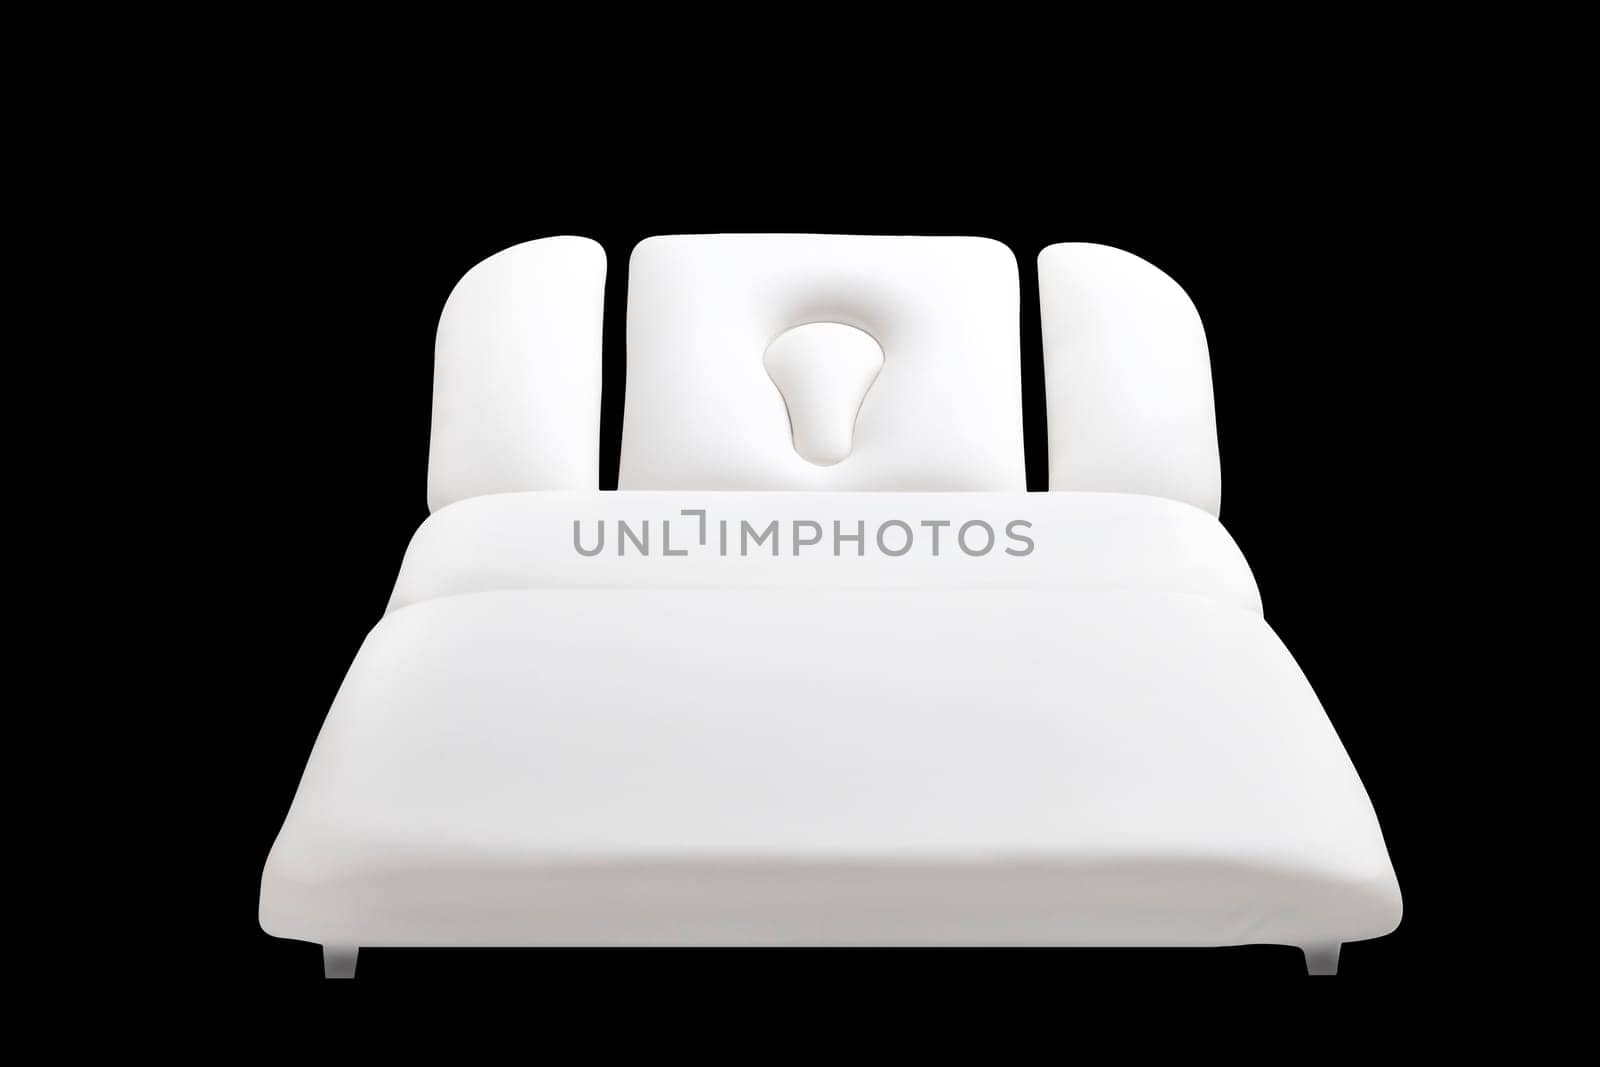 massage couch isolated on black background by drakuliren